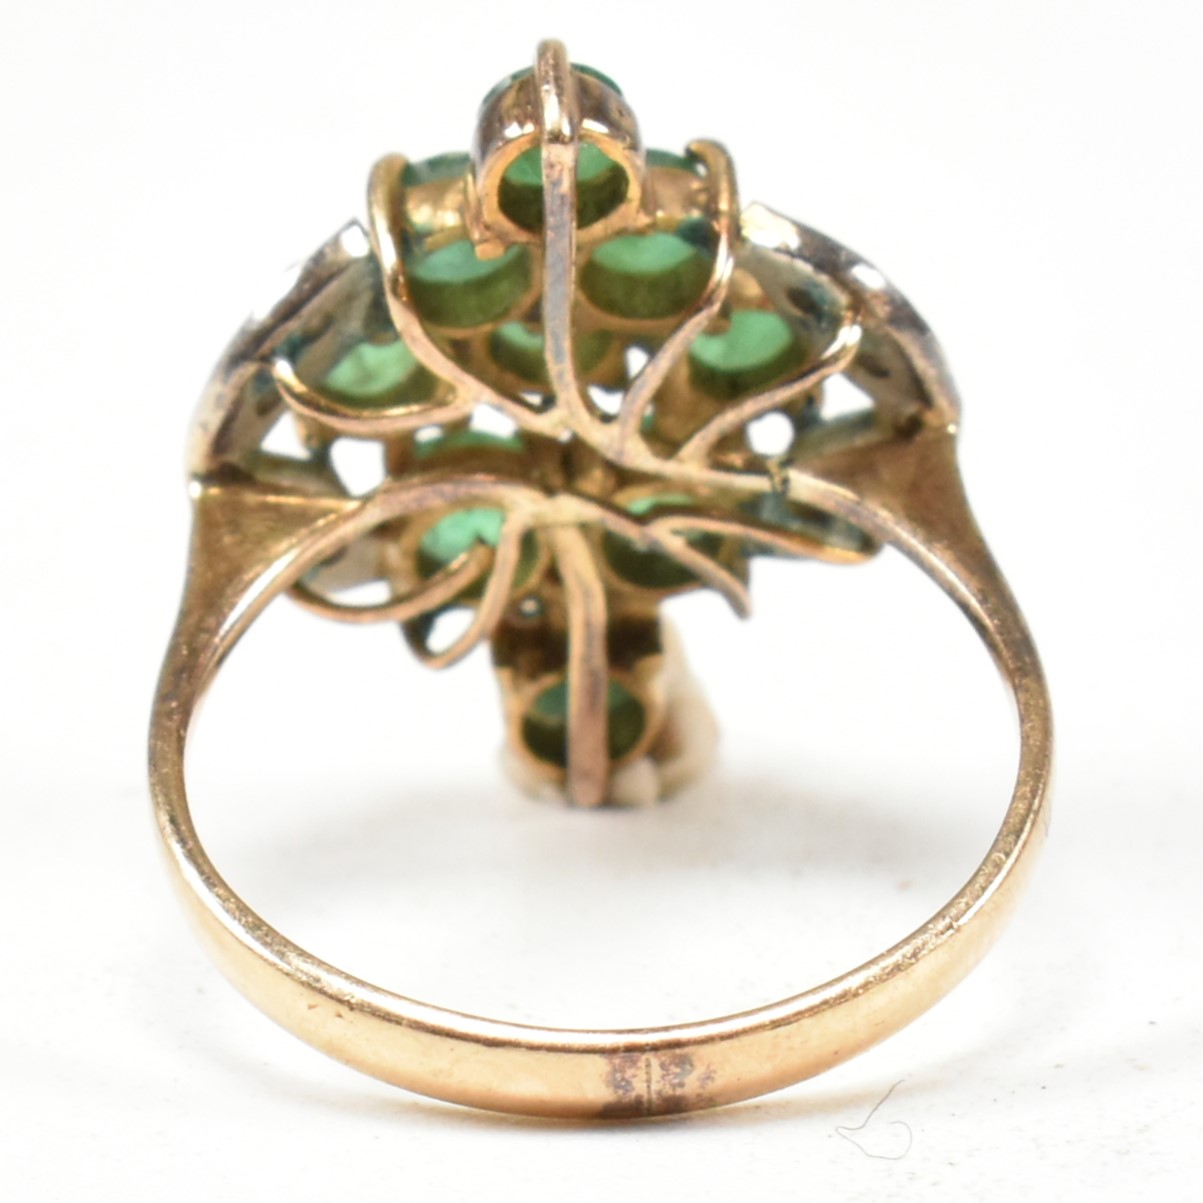 EMERALD & DIAMOND CLUSTER RING - Image 2 of 8